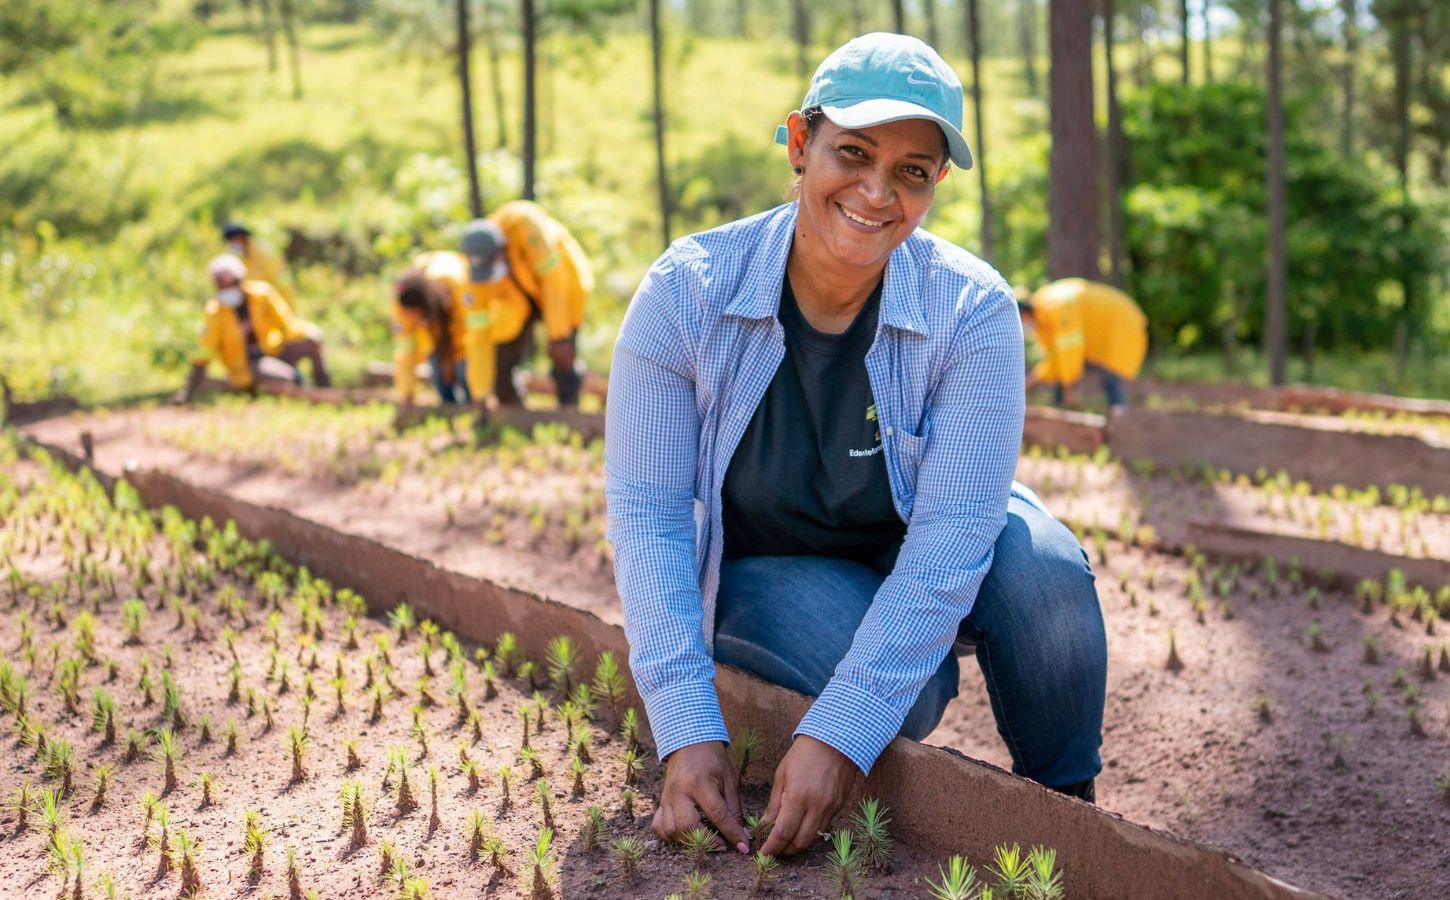 Plant Based News has partnered with Eden Reforestation Projects